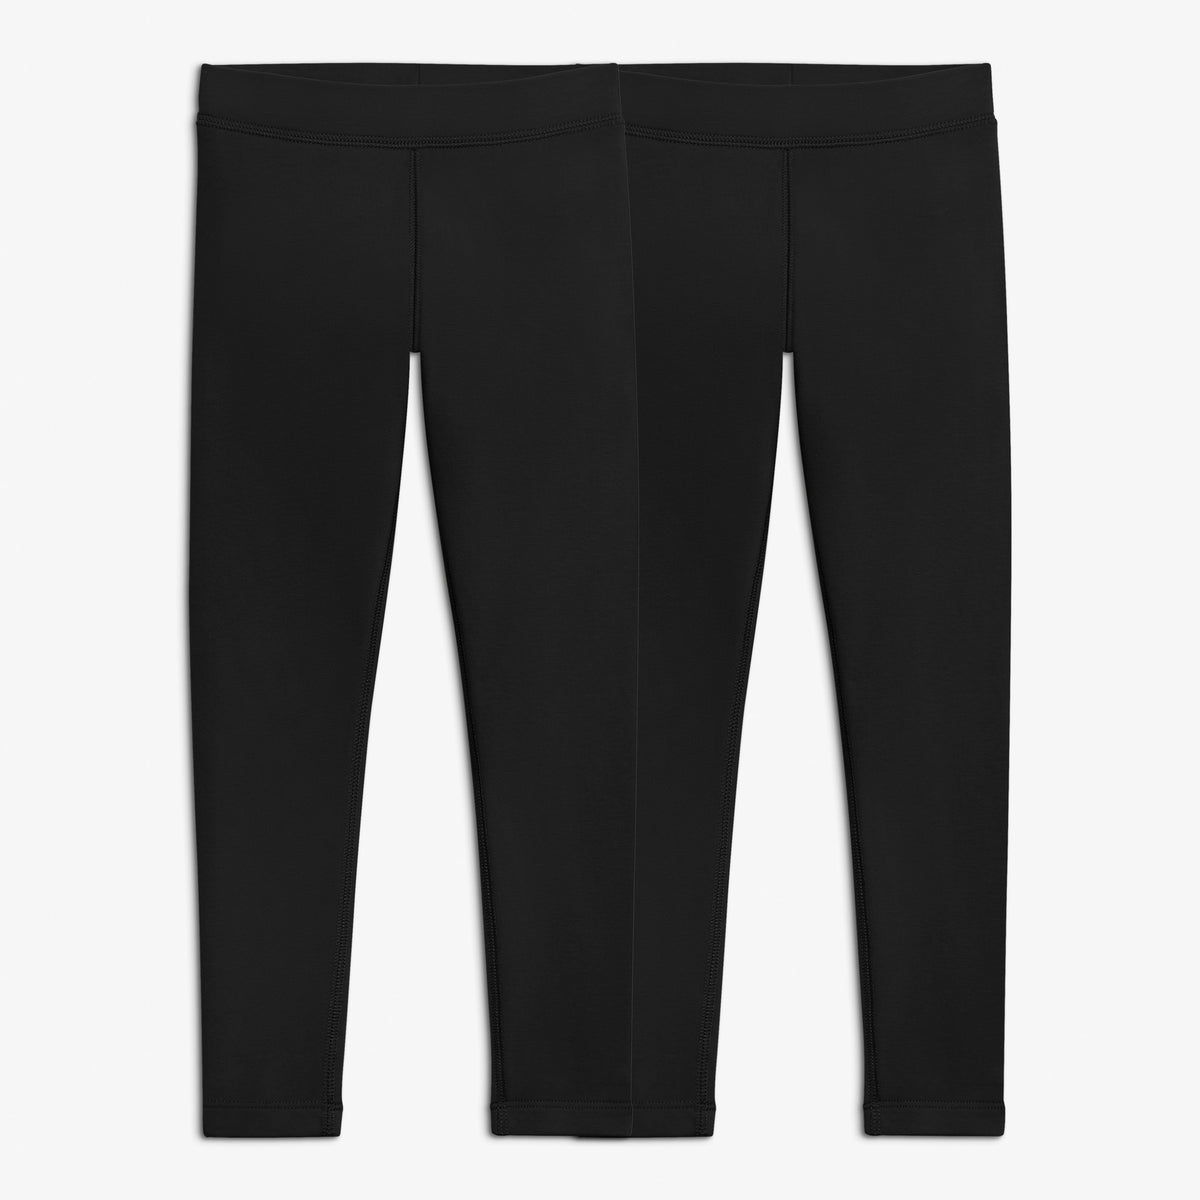 Cozy french terry legging 2-pack